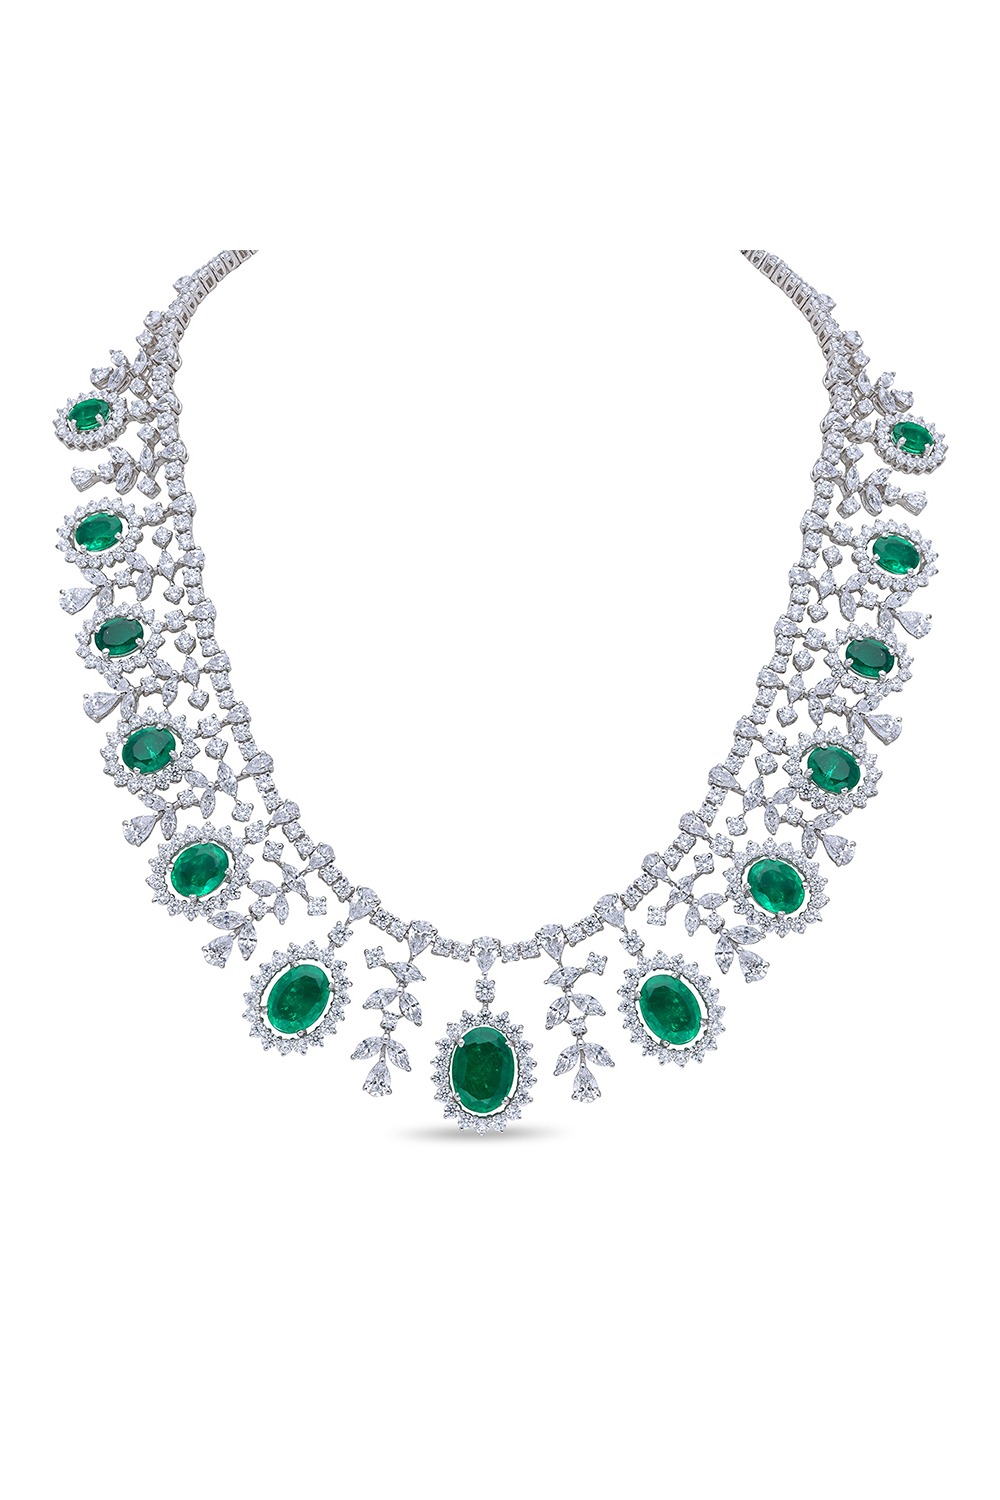 Green Bridal Necklace